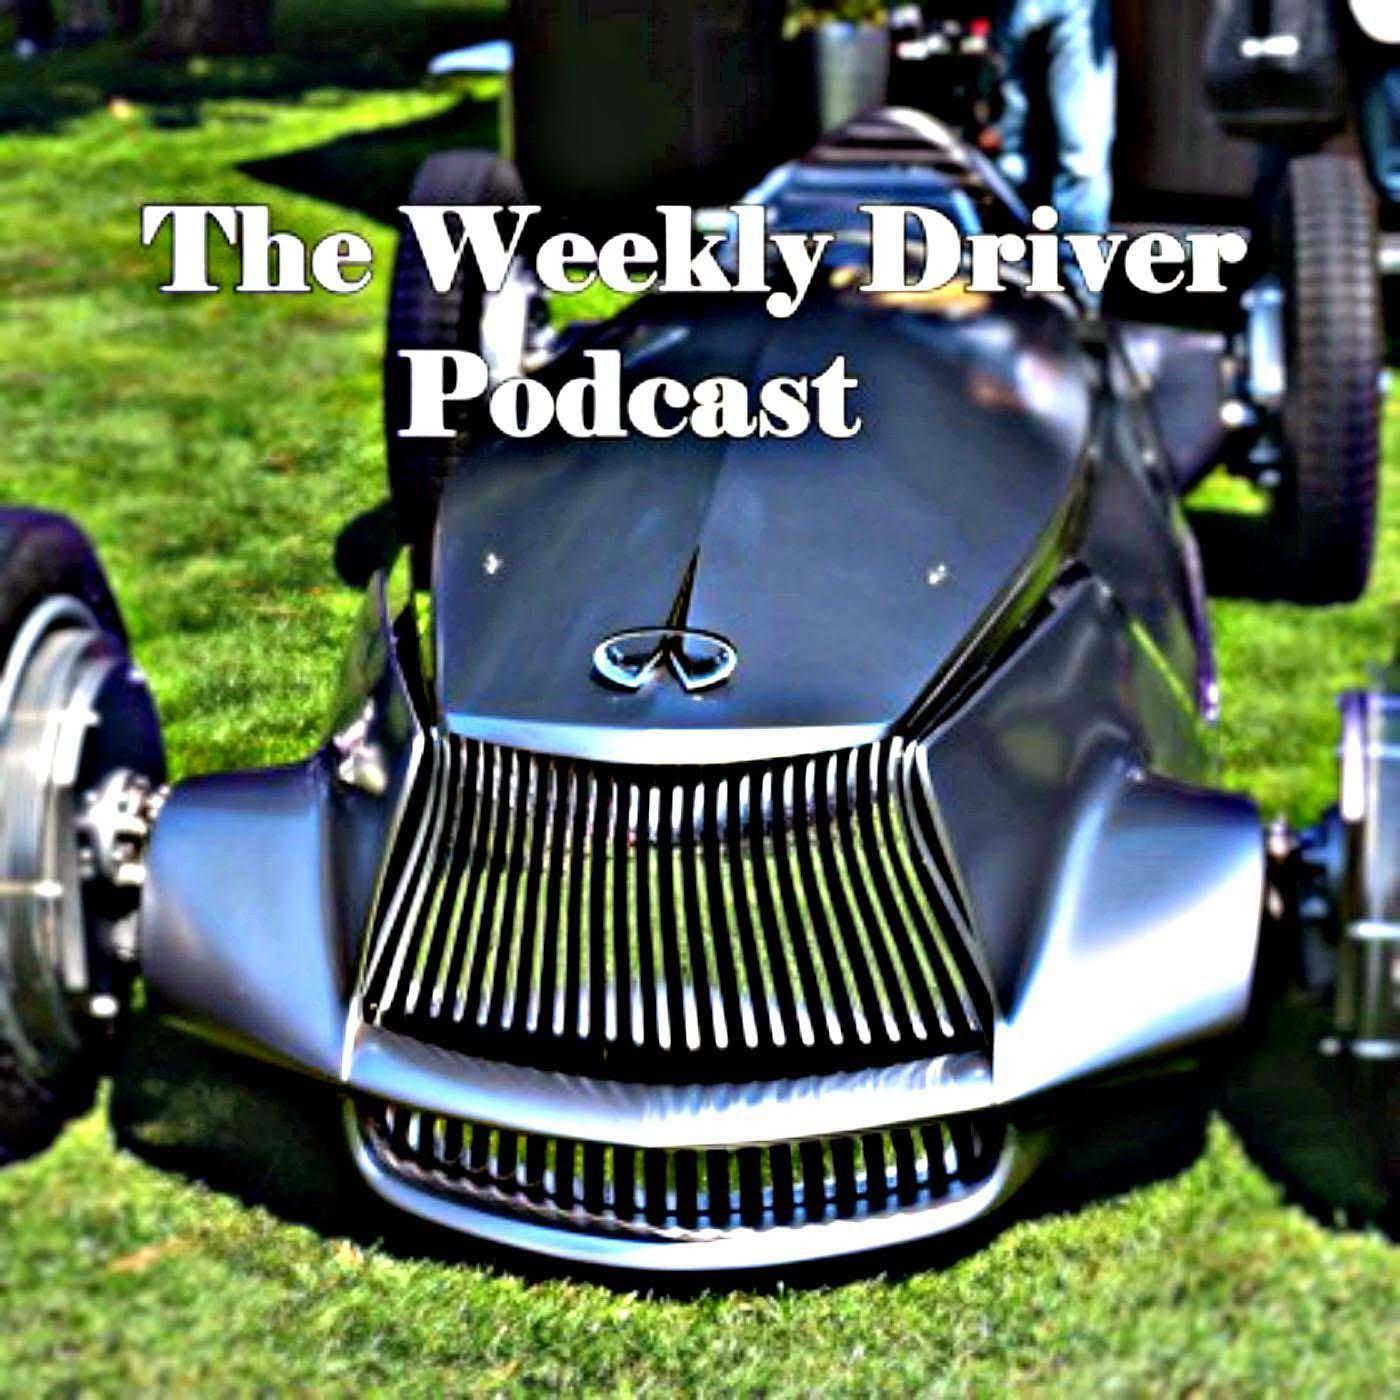 THE WEEKLY DRIVER